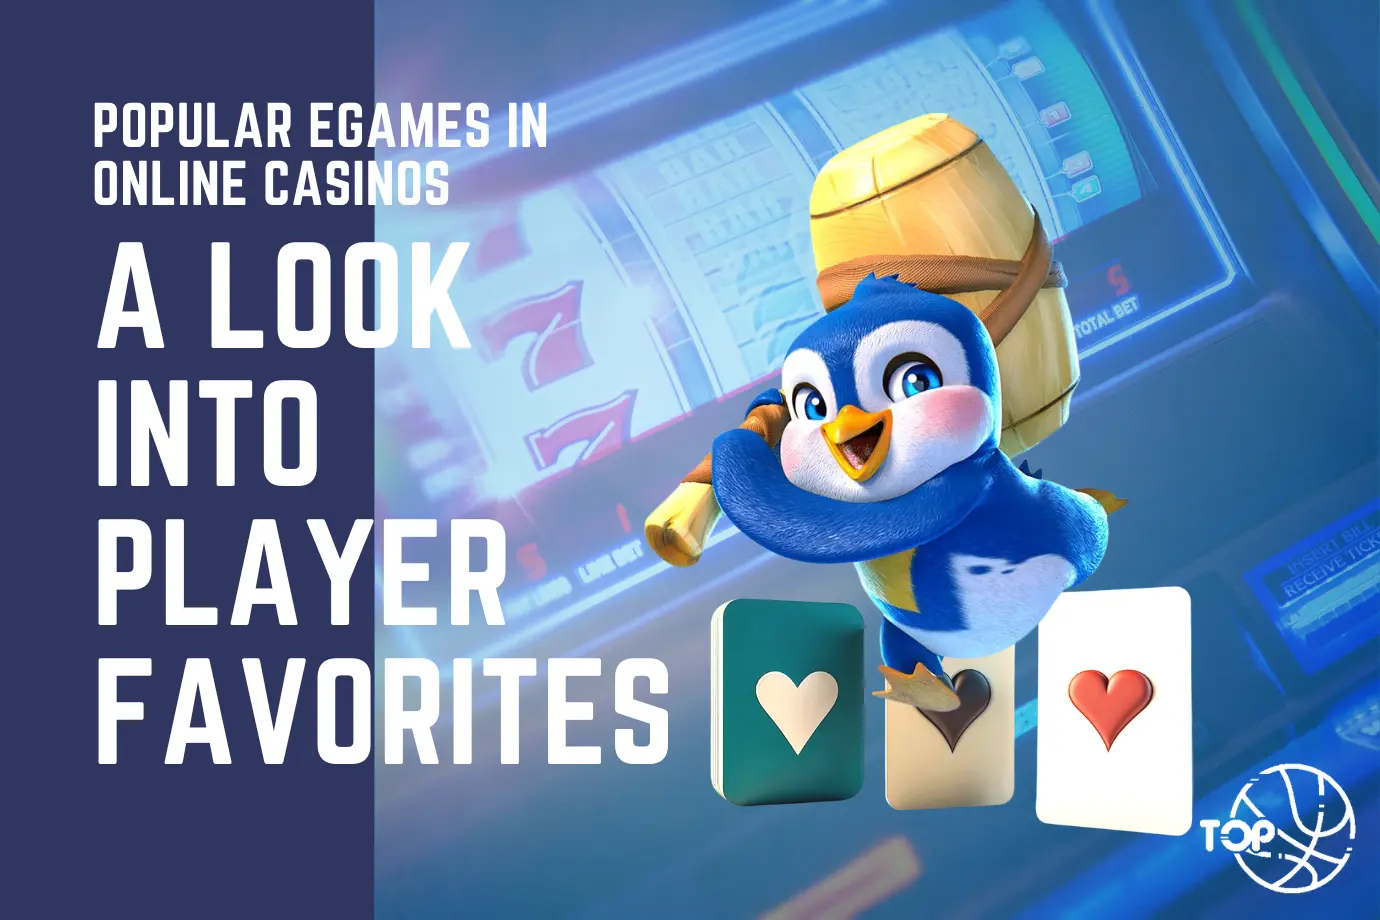 Popular EGames in Online Casinos: A Look into Player Favorites